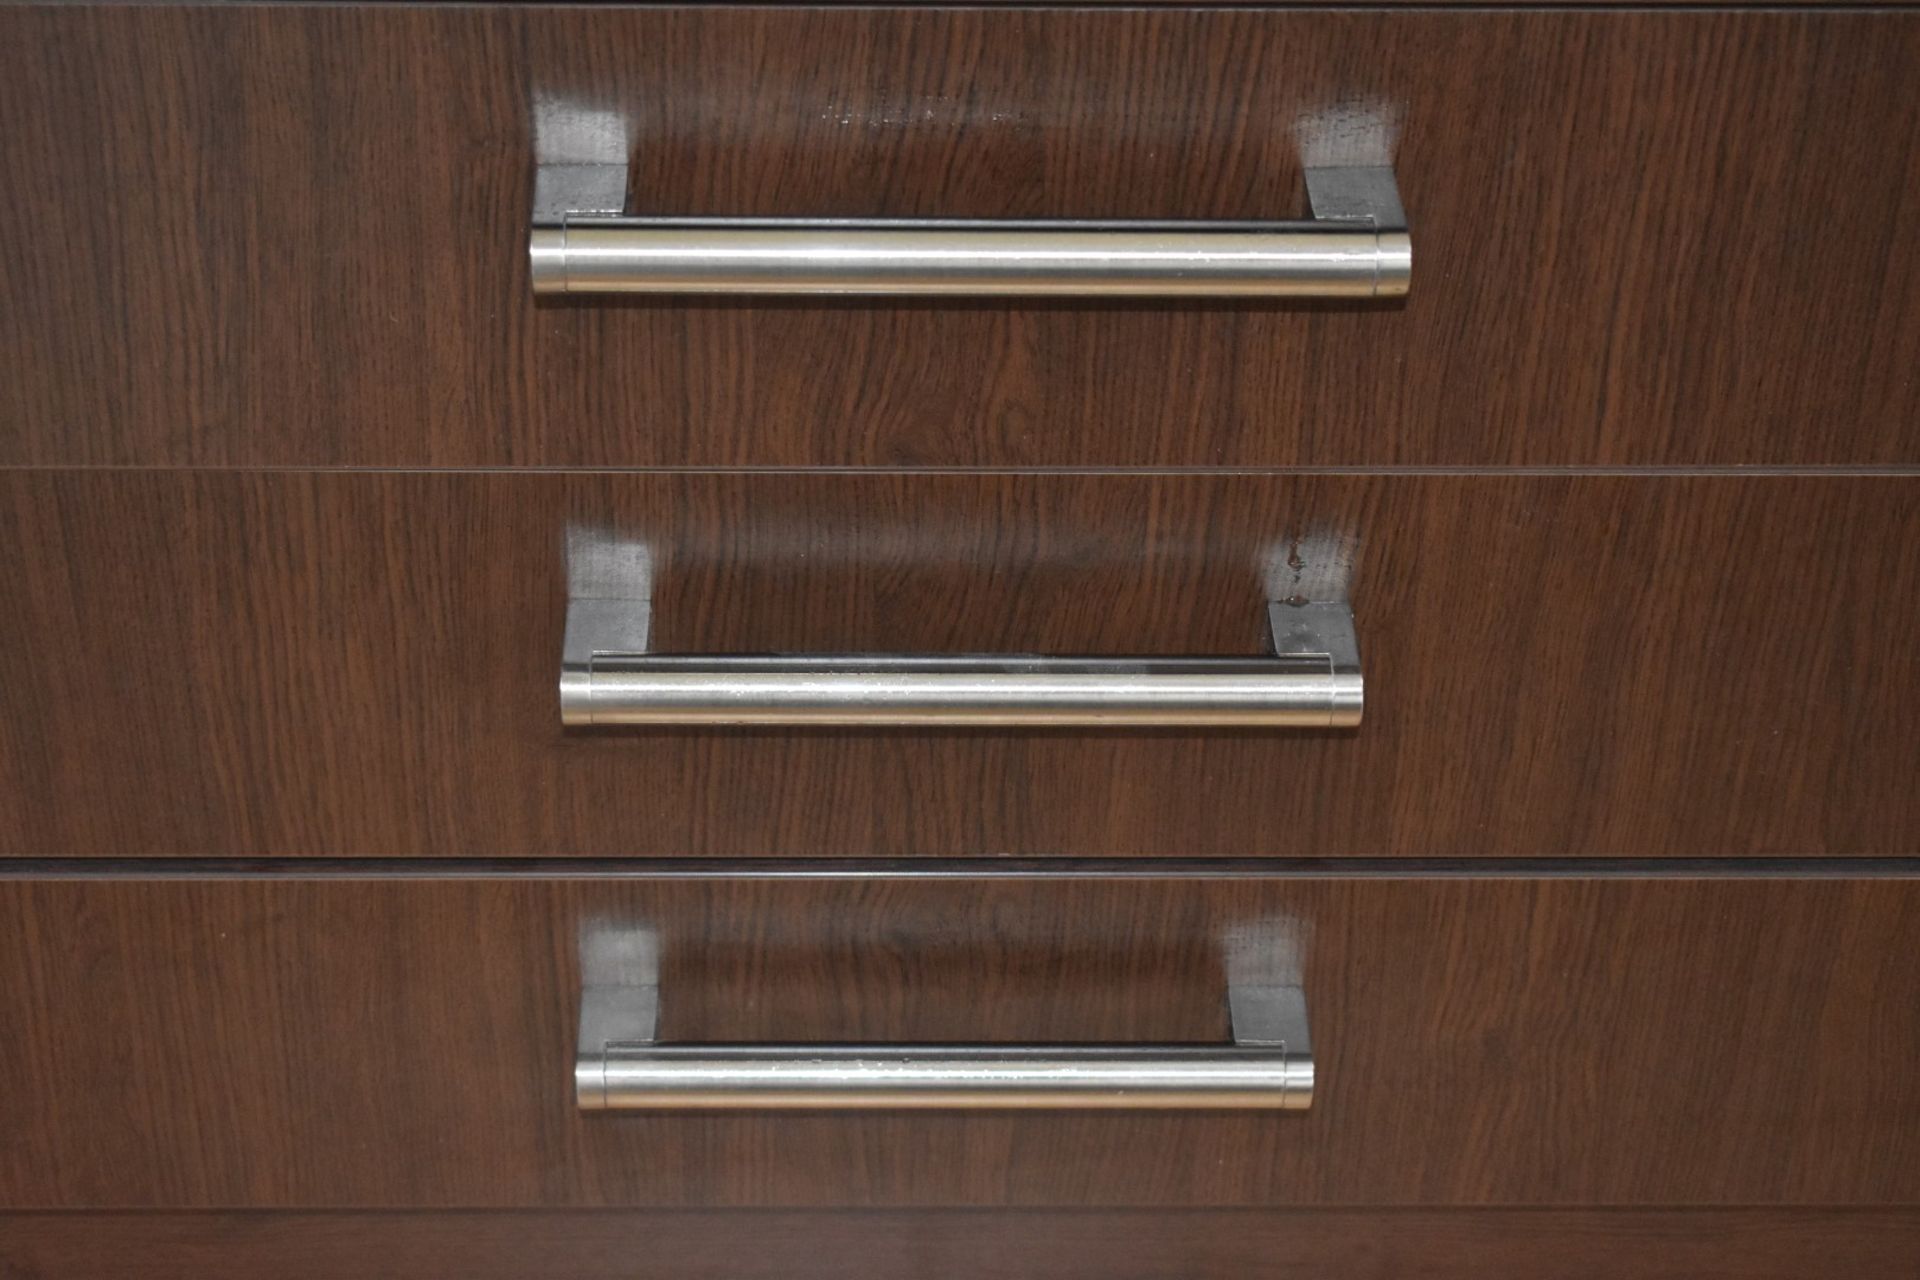 1 x Chest of Drawers With Walnut Finish - Dimensions: H60 x W81 x D54 cms - No VAT on the Hammer - - Image 4 of 5